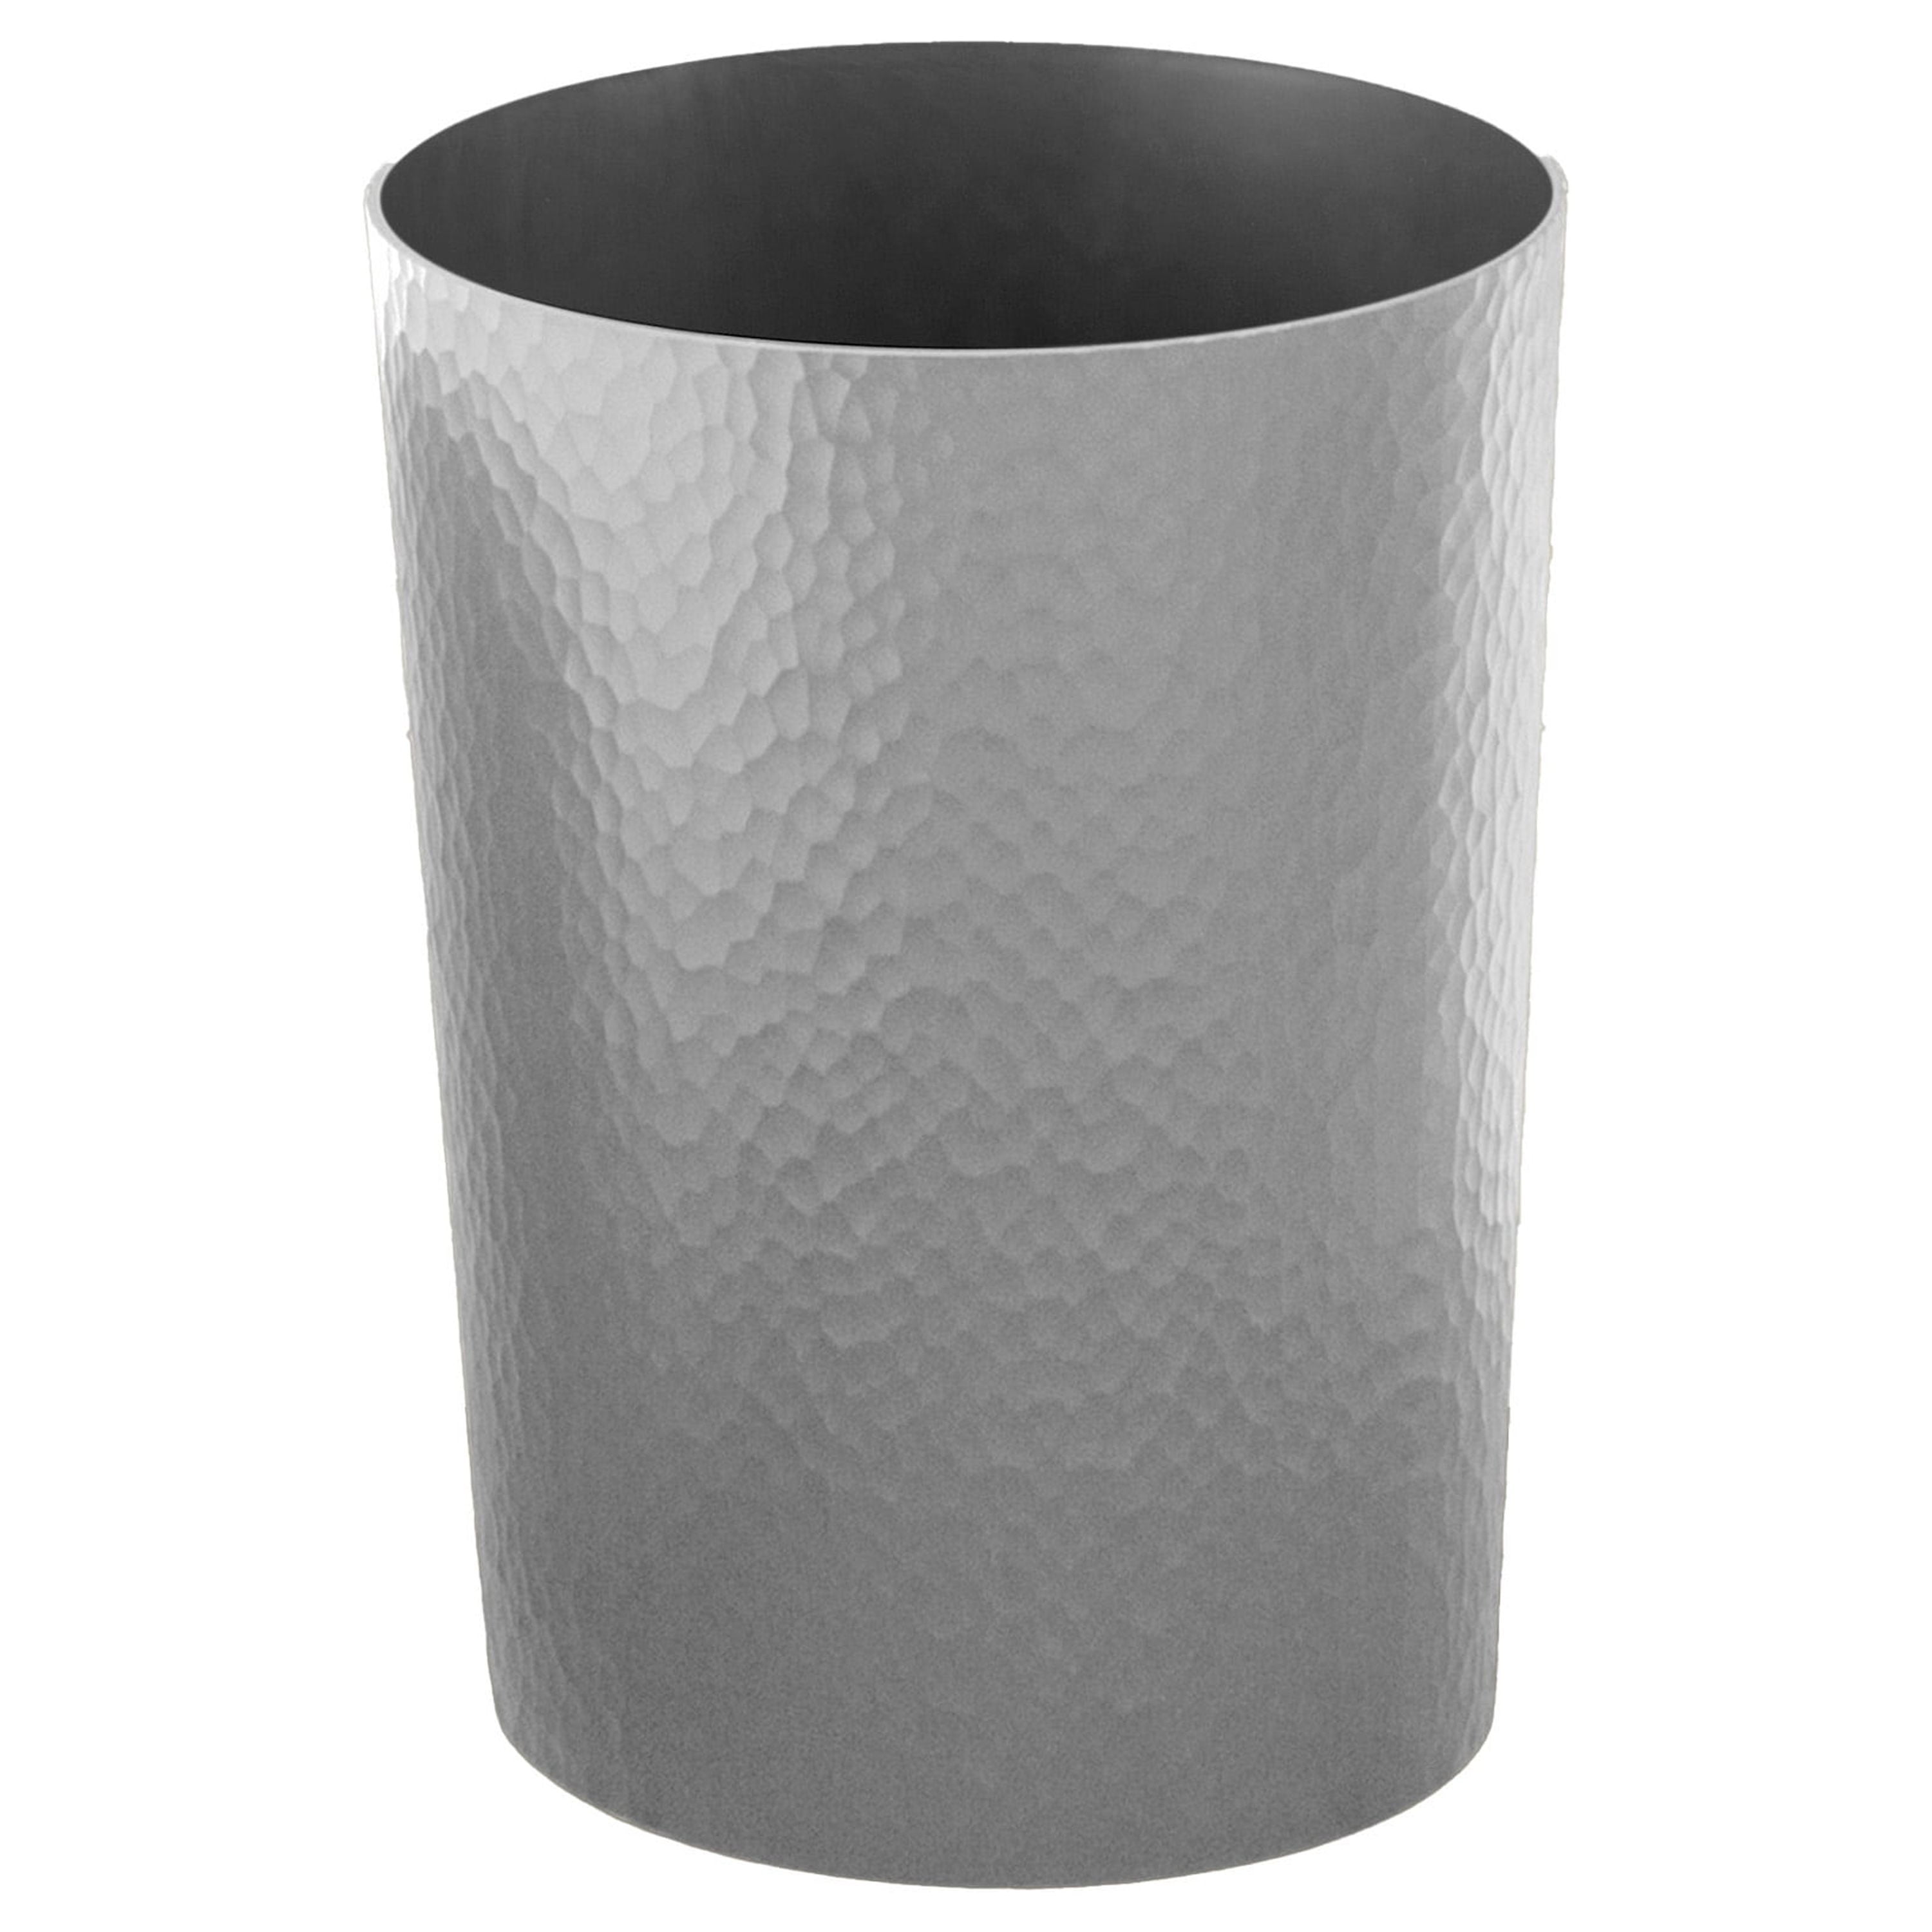 Bath Bliss Hammered Textured Trash Can in Silver, Sliver